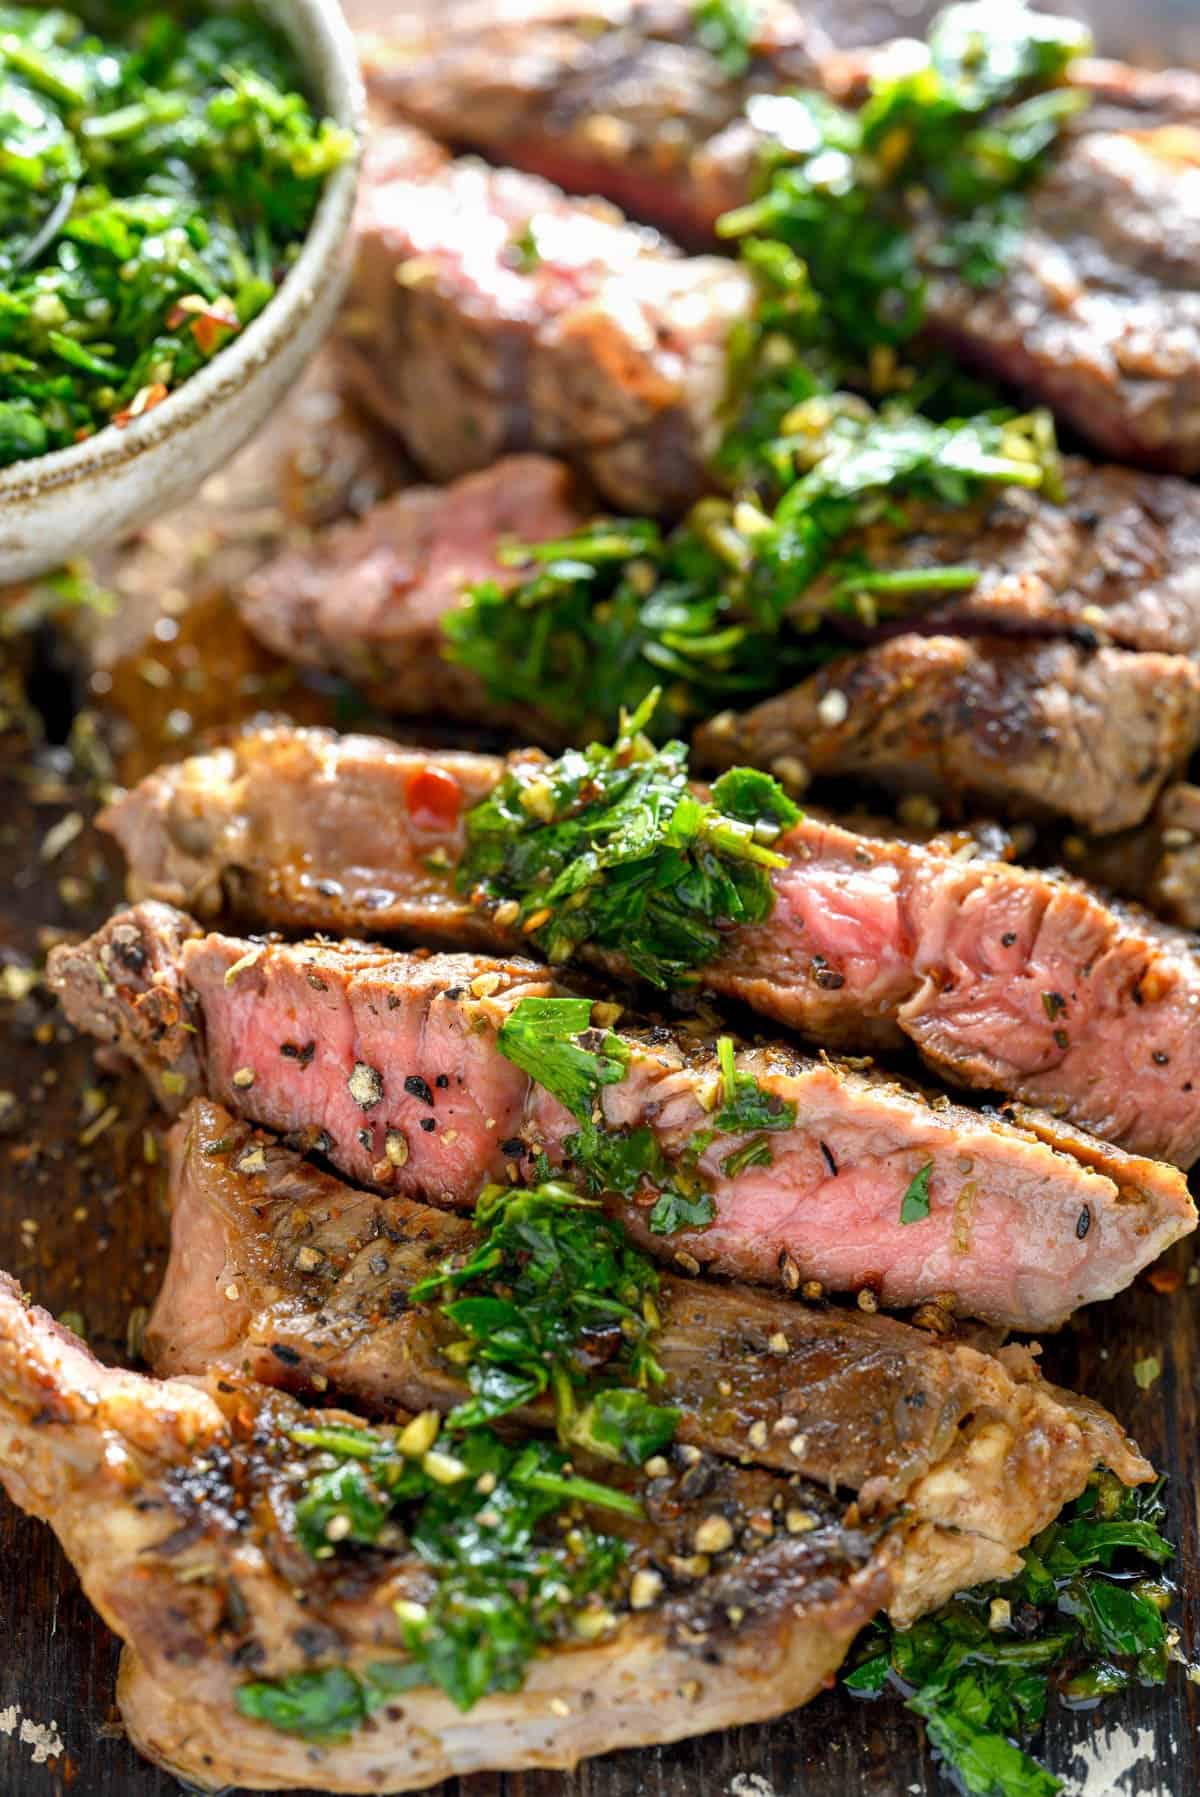 A sliced medium-rare steak with chimichurri sauce drizzled on top.